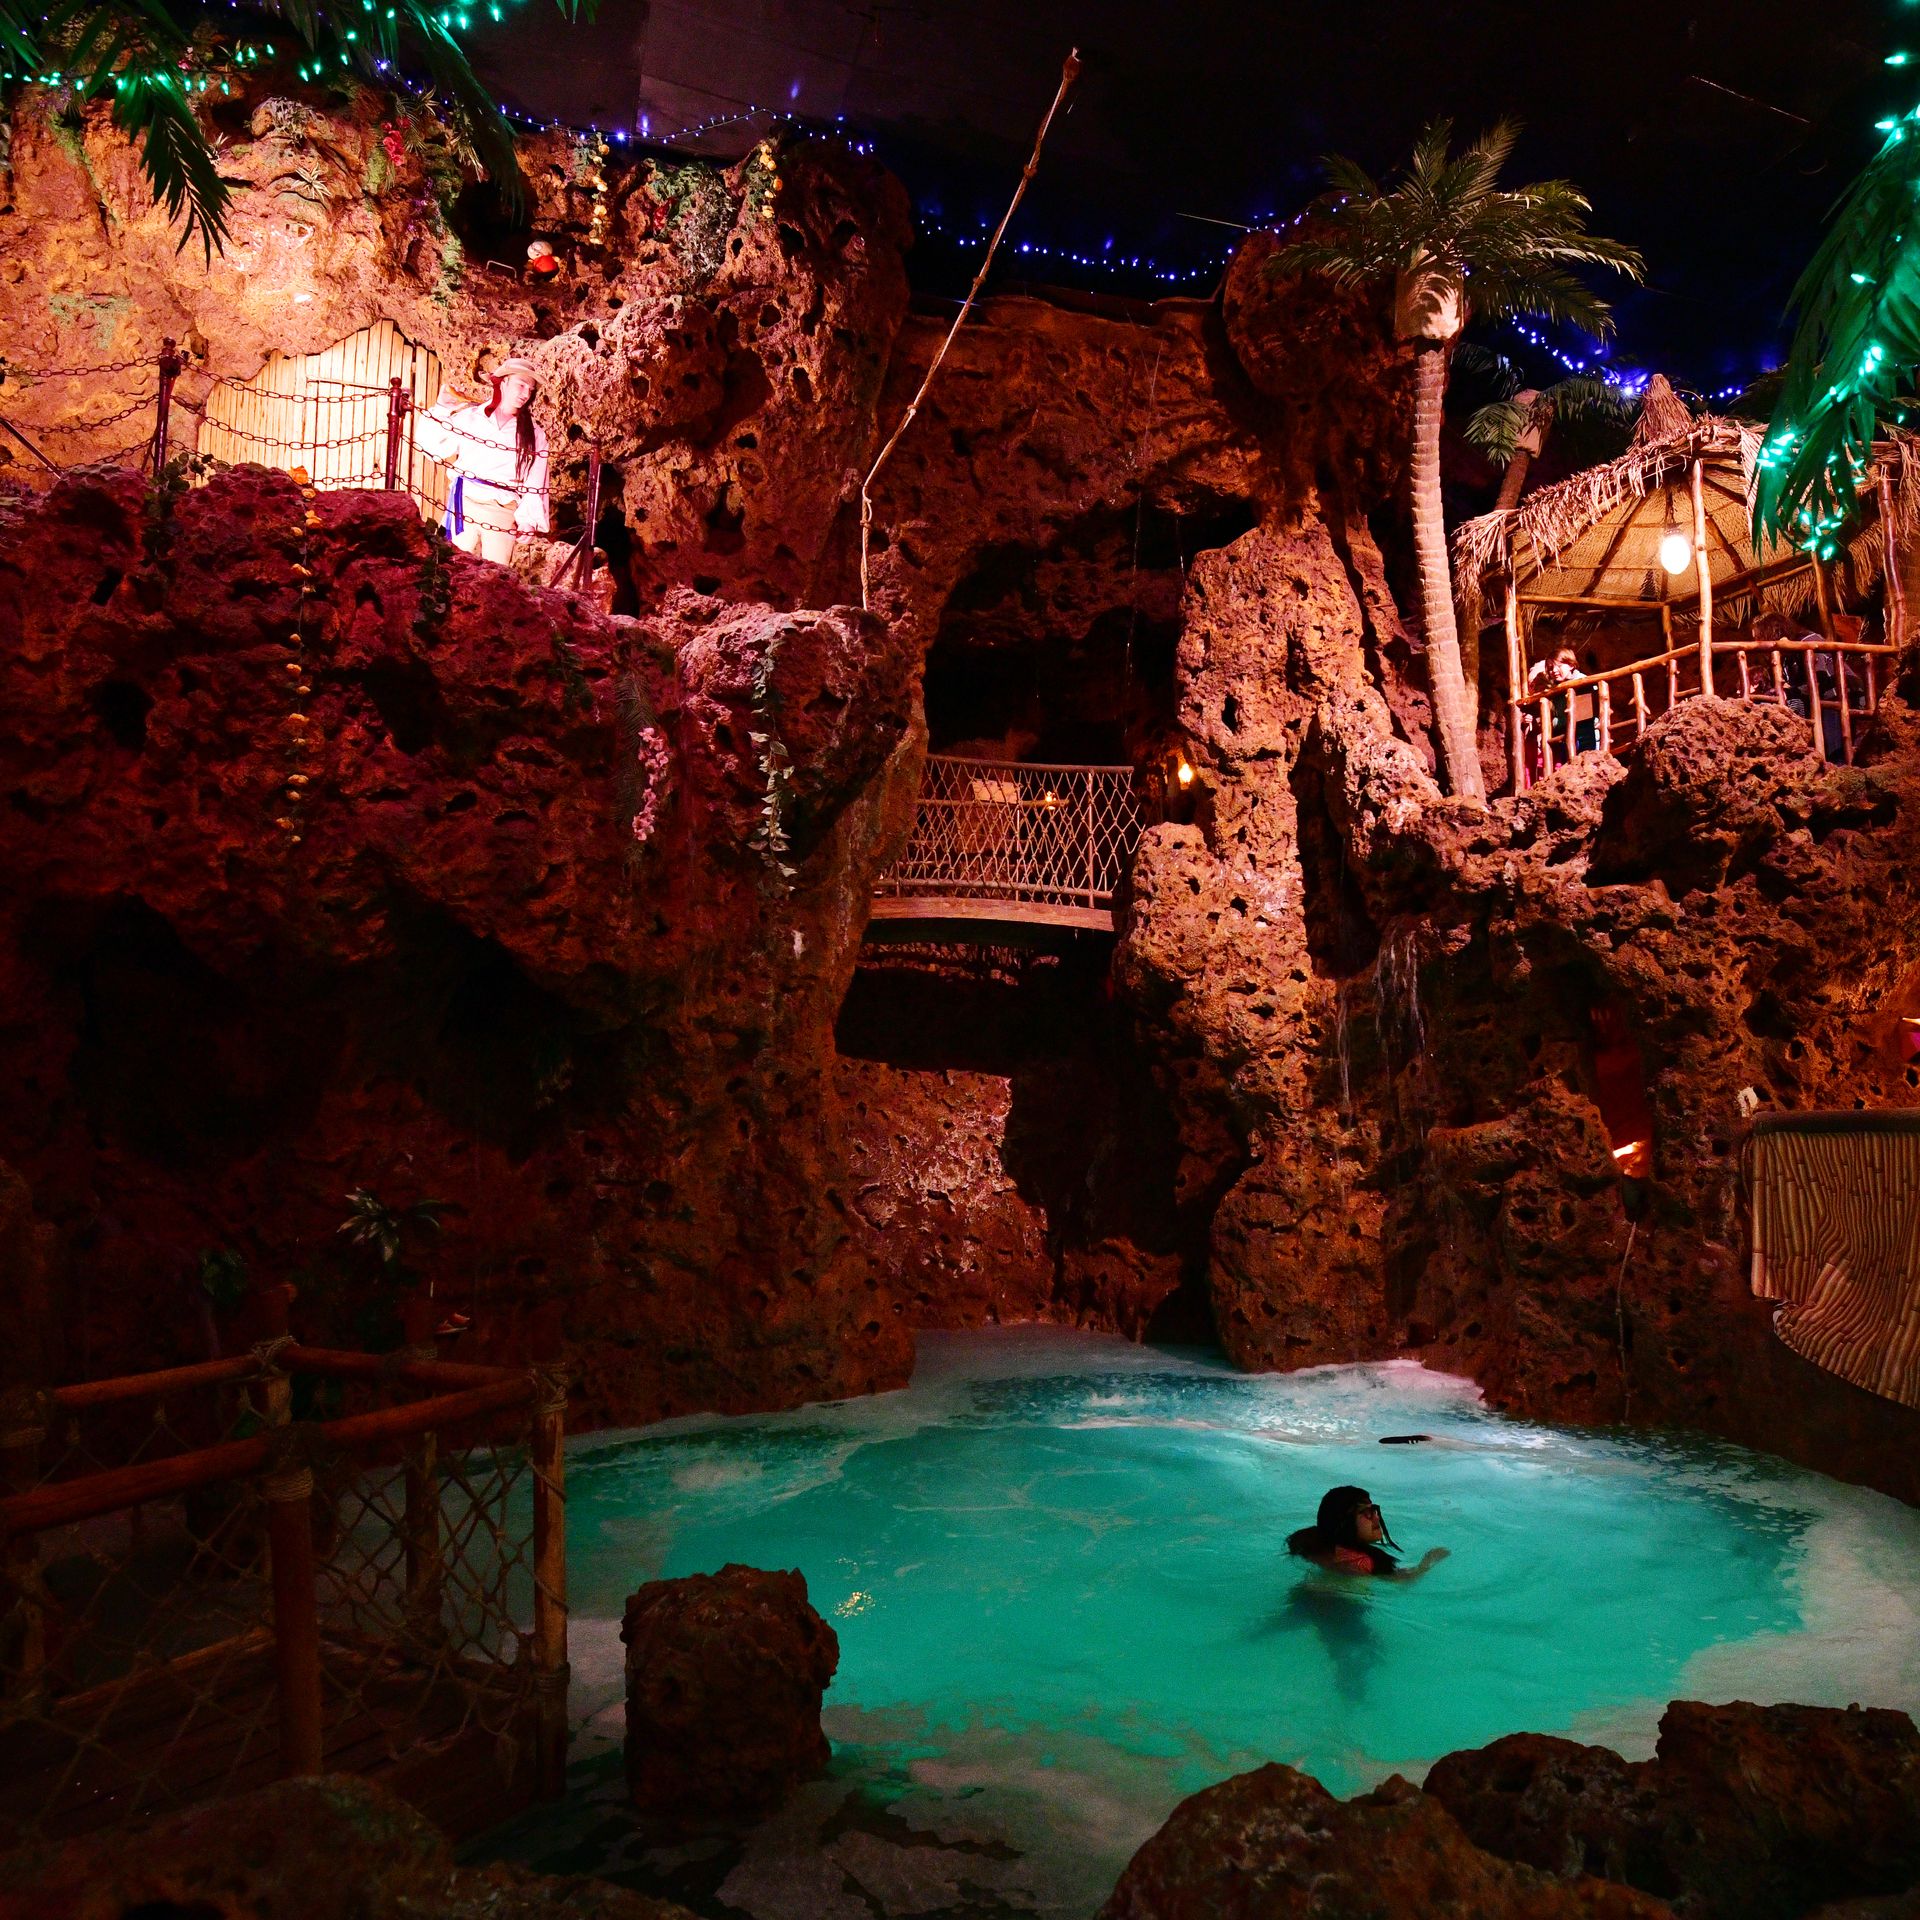 What to Know About the 'South Park' Creators' Casa Bonita